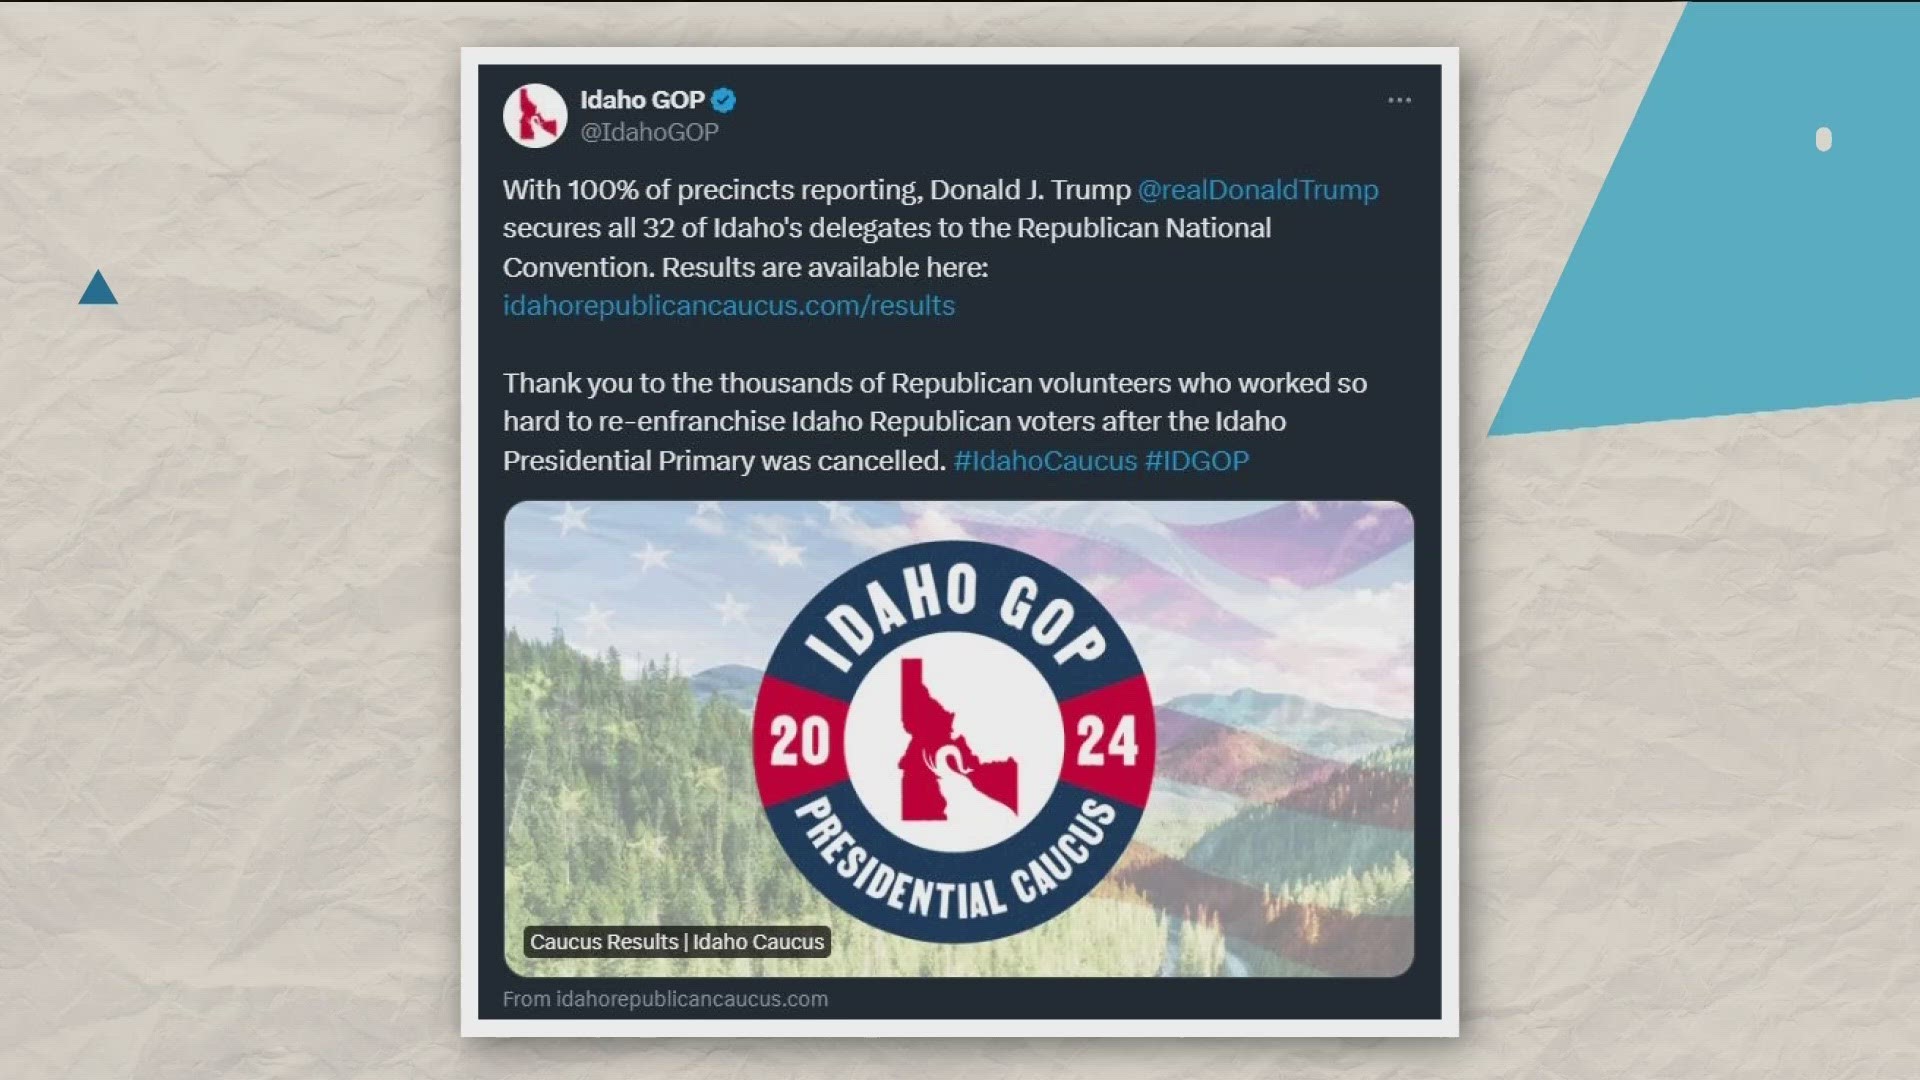 According to the GOP website, 9,649 ballots were boxed in Ada County, which amounts to only 6.6% of the 146,816 registered Republicans in Idaho's largest county.